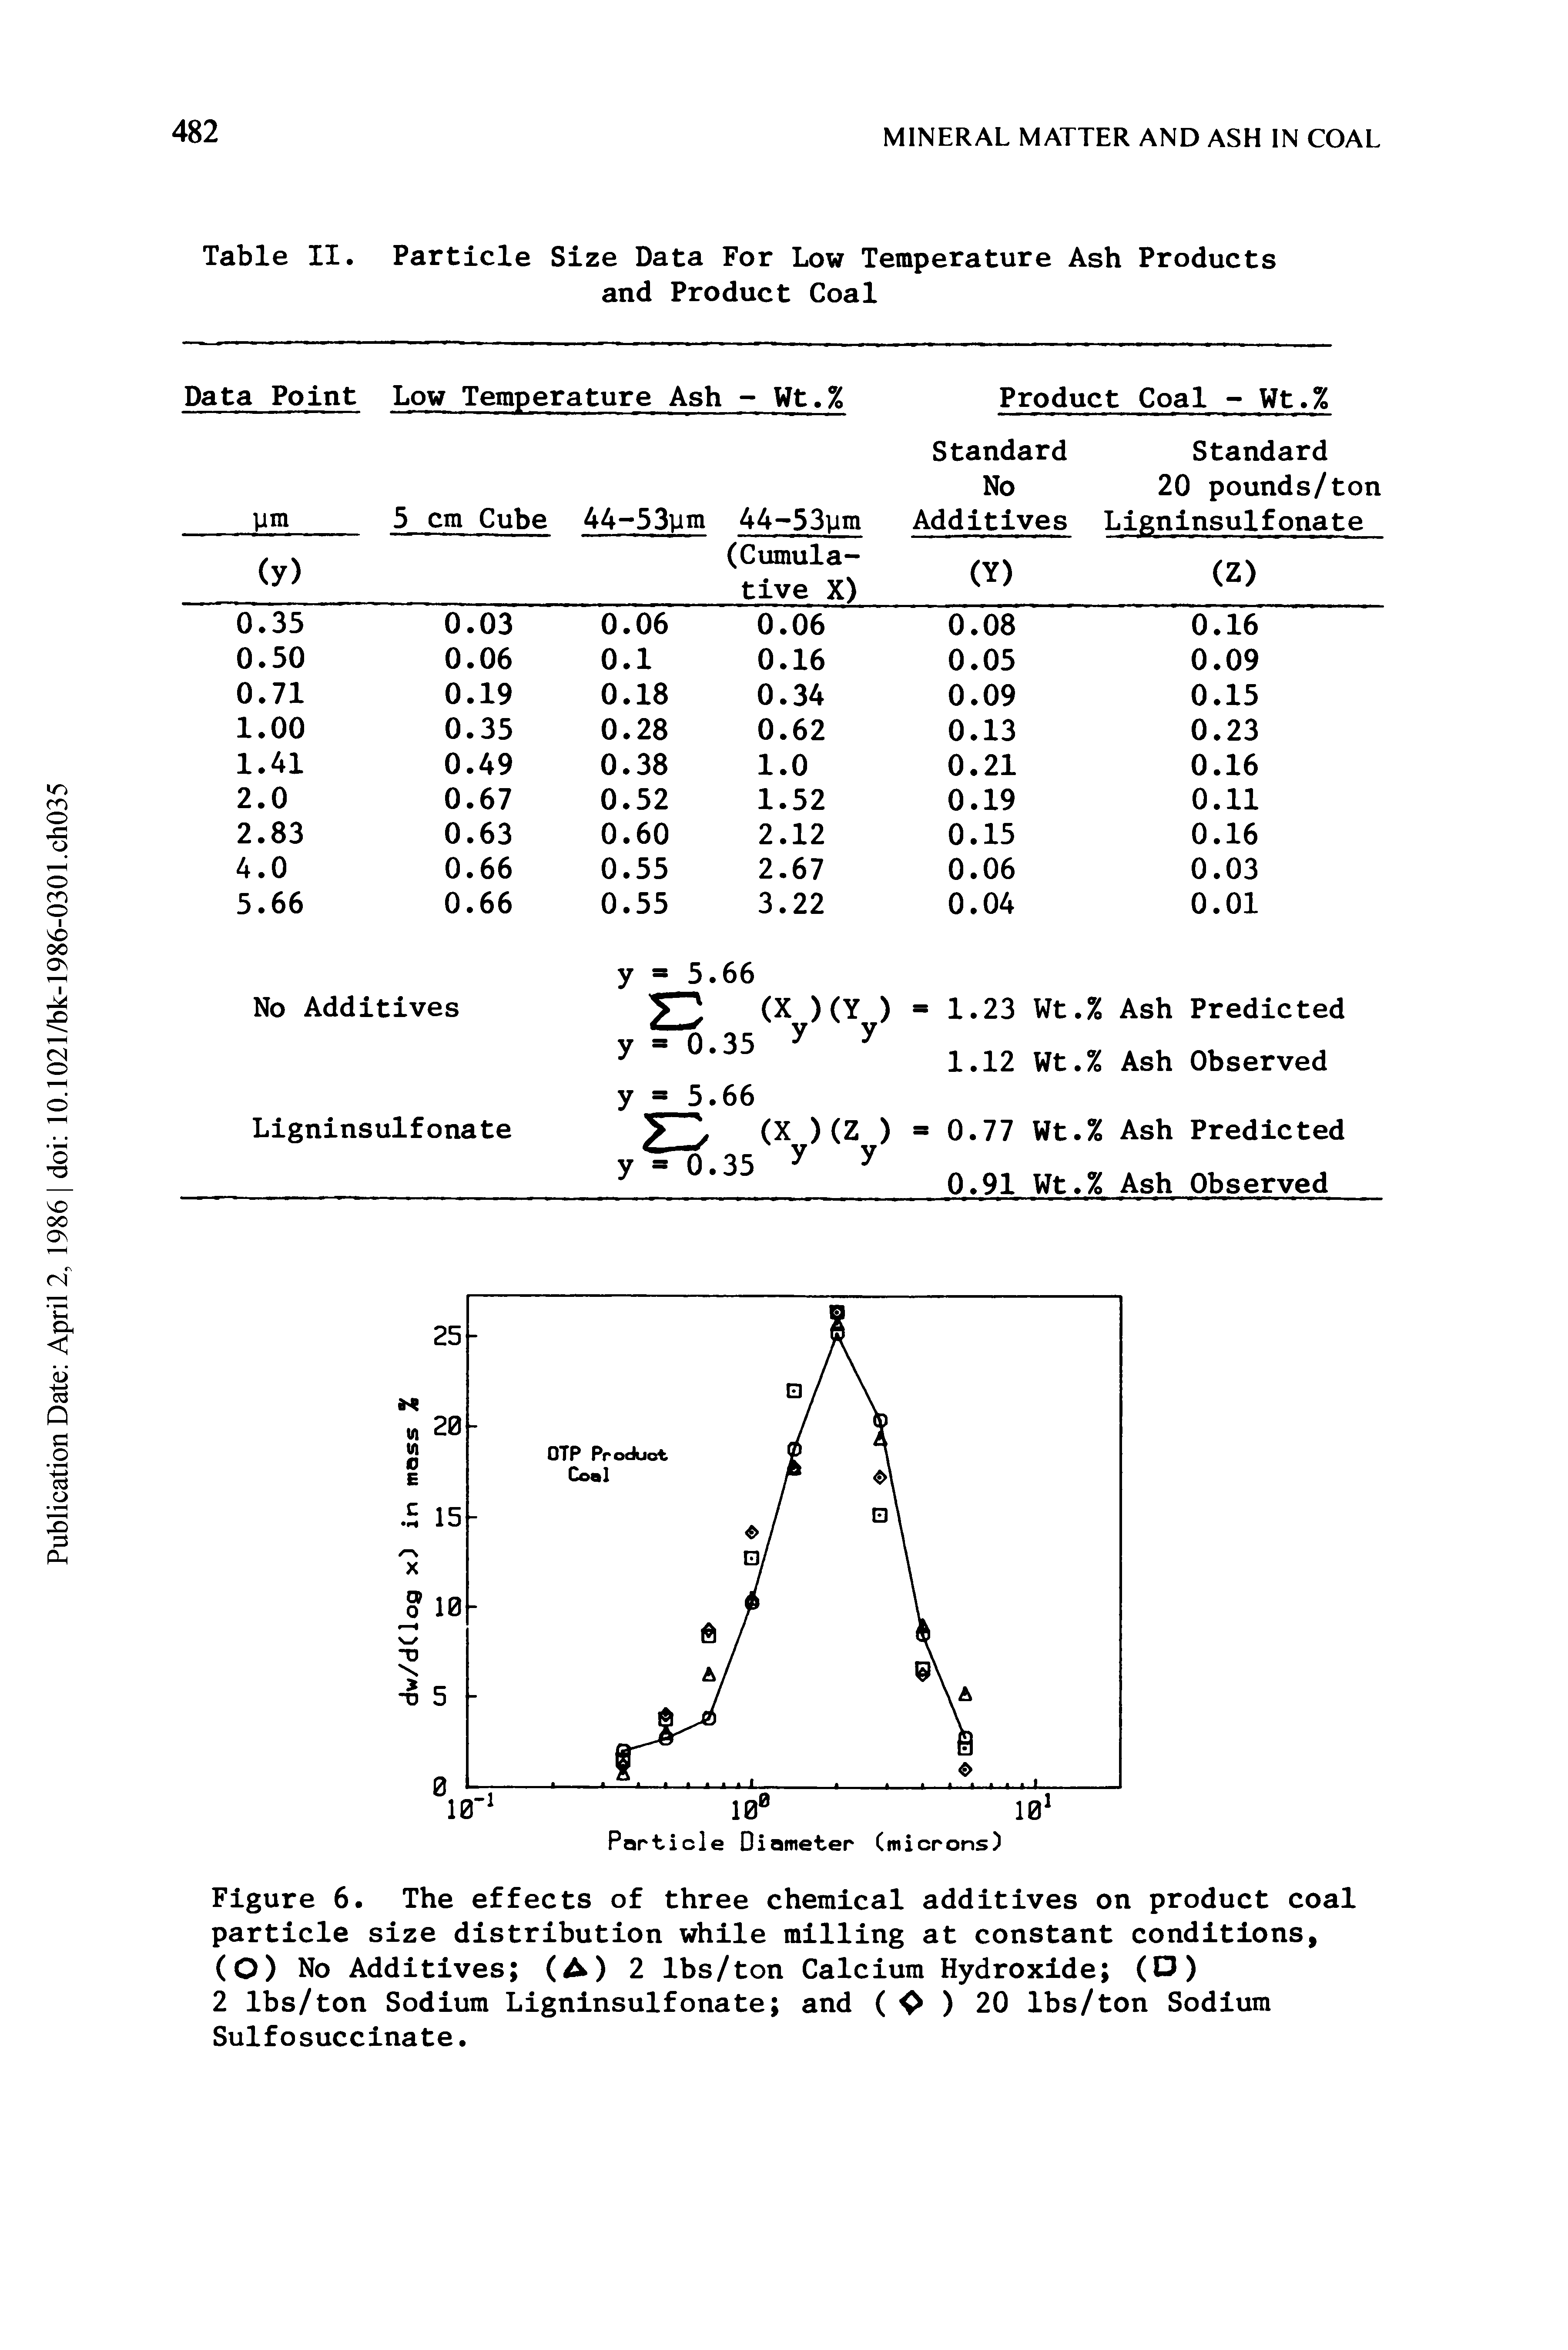 Figure 6. The effects of three chemical additives on product coal particle size distribution while milling at constant conditions, (O) No Additives (A) 2 Ibs/ton Calcium Hydroxide (D)...